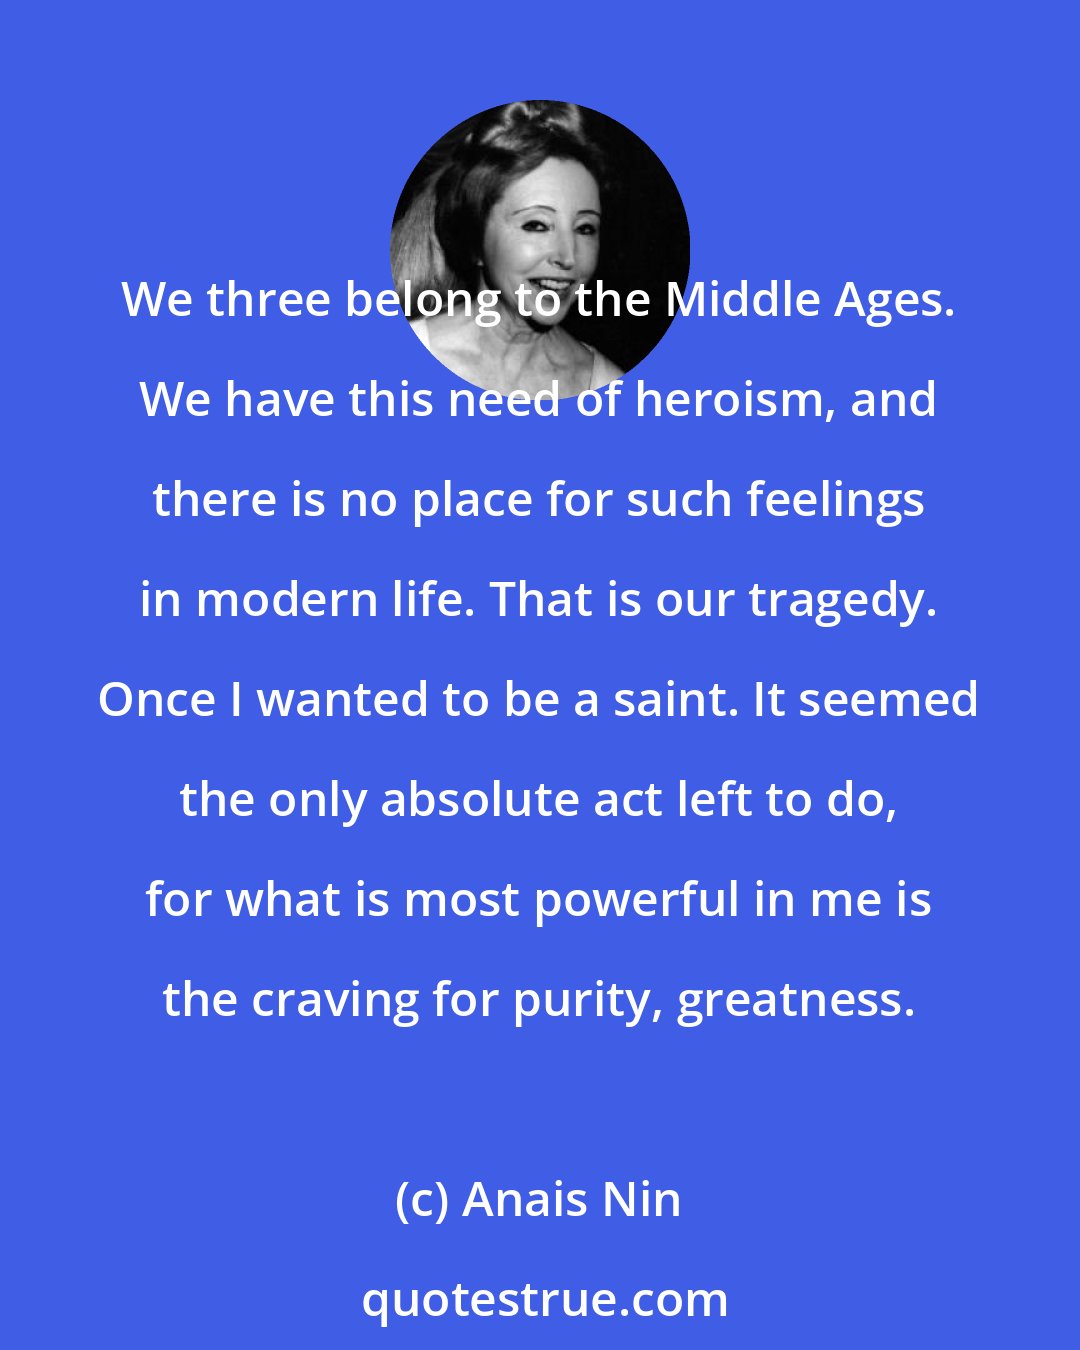 Anais Nin: We three belong to the Middle Ages. We have this need of heroism, and there is no place for such feelings in modern life. That is our tragedy. Once I wanted to be a saint. It seemed the only absolute act left to do, for what is most powerful in me is the craving for purity, greatness.